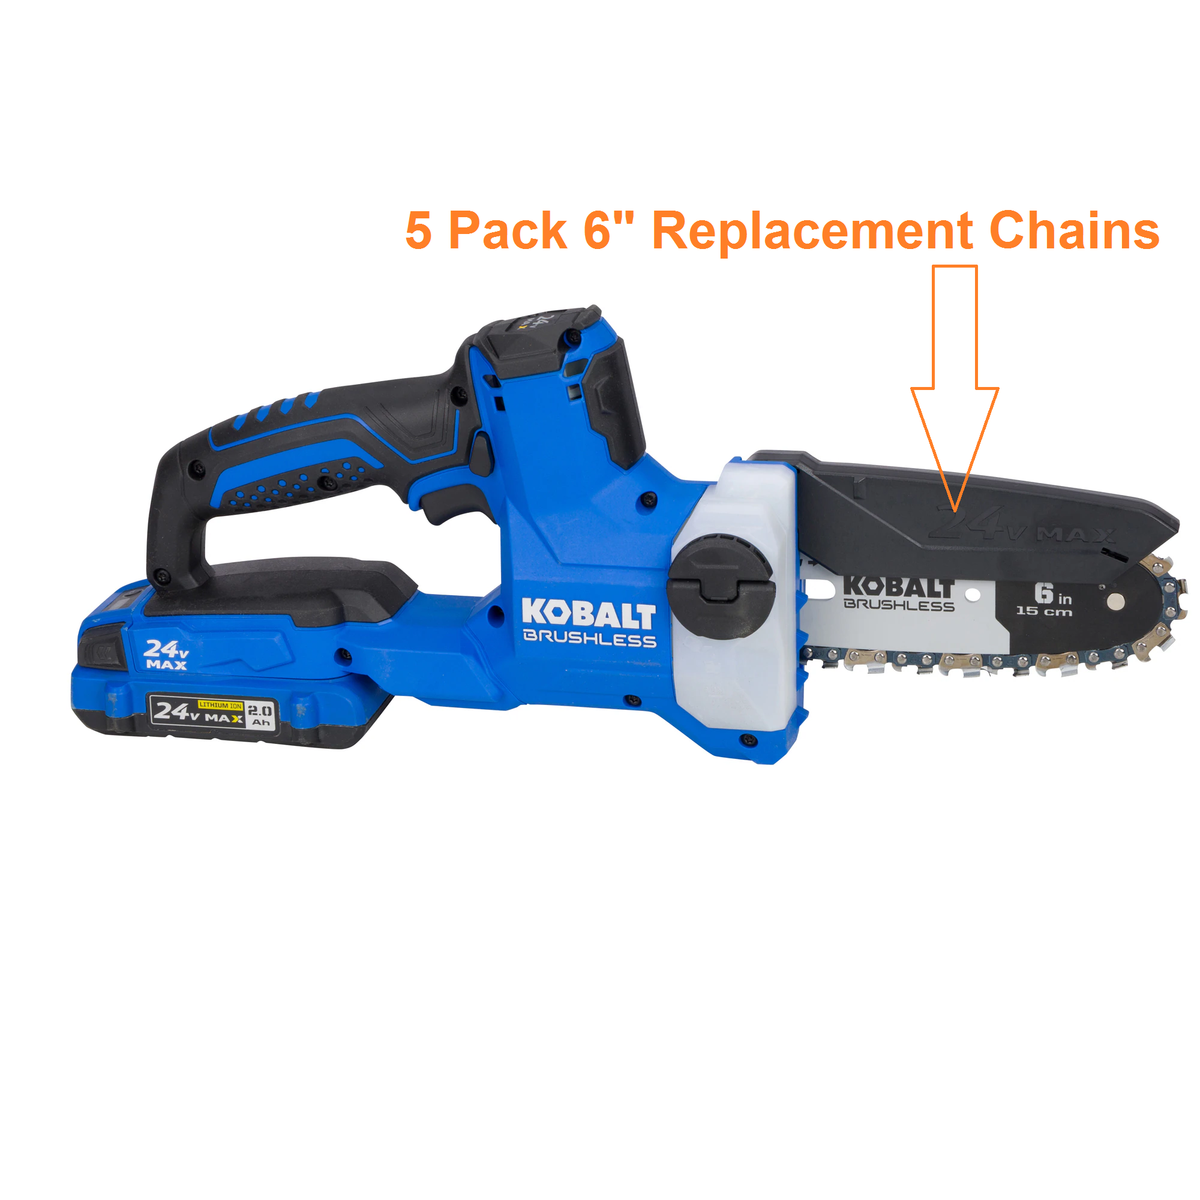 5 Pack 6" Chainsaw Chain Replaces Kobalt Pruning Saw 3/8LP .043 28DL KMCS 1024B